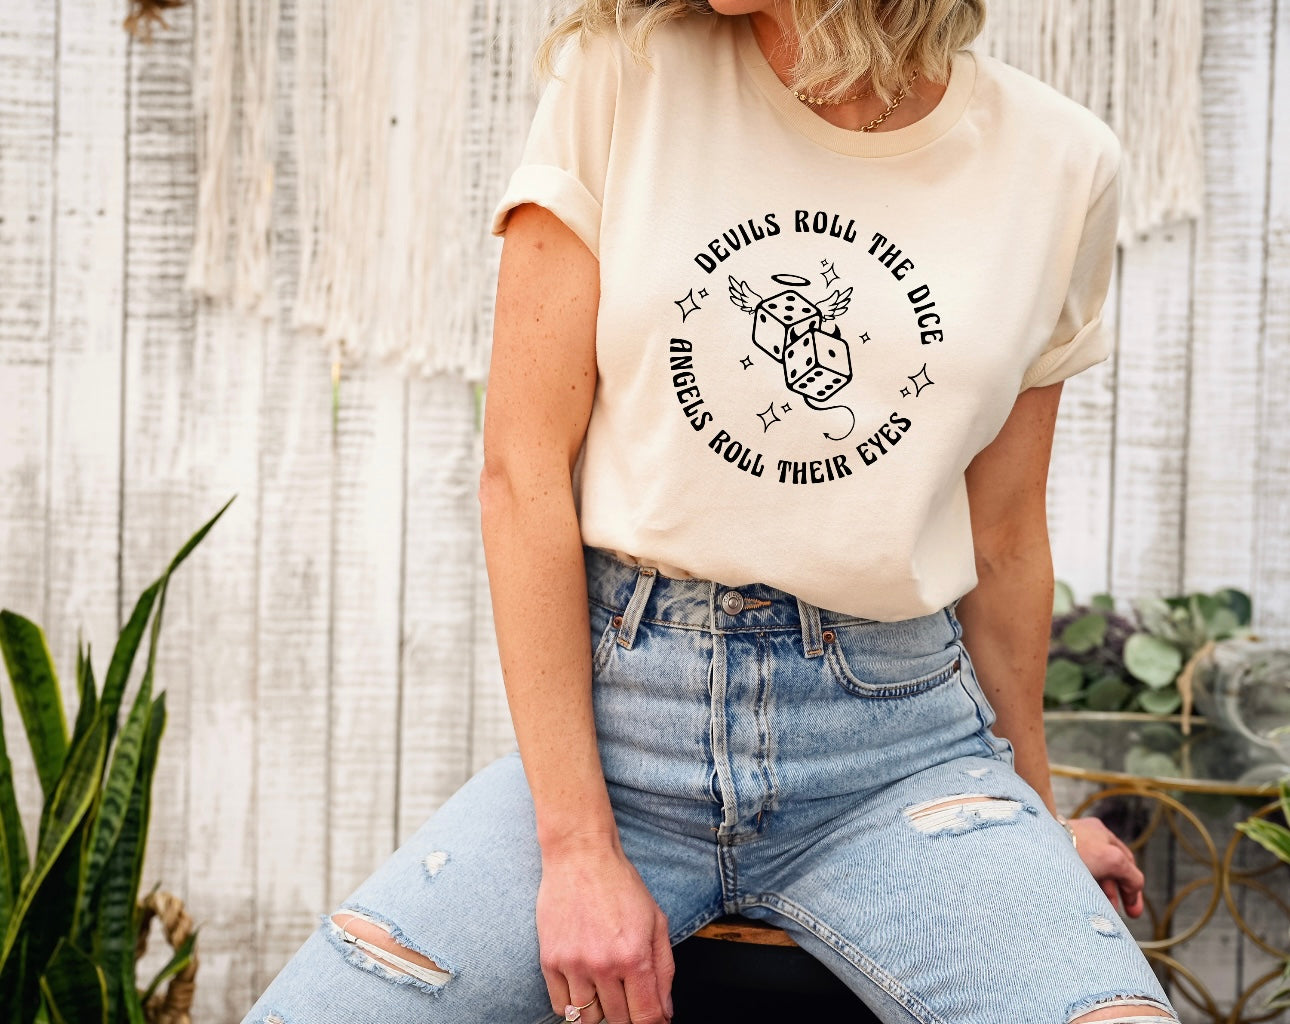 Devils Roll the Dice, Angel's Roll Their Eyes Shirt